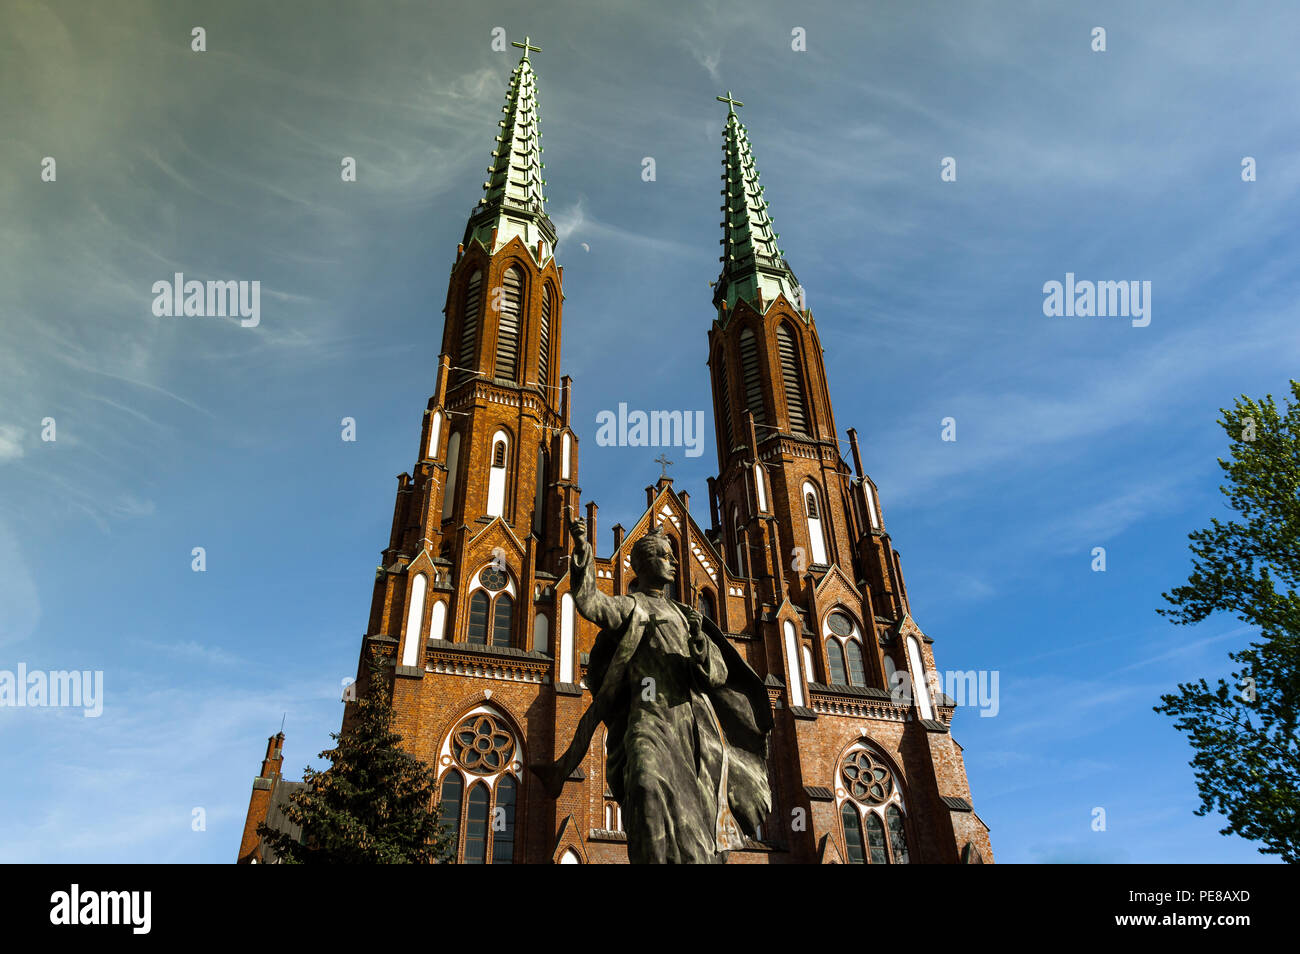 Main facade of Cathedral of St. Michael the Archangel and St. Florian the Martyr in Warsaw, Poland. Views of the sculpture of the entrance. Stock Photo